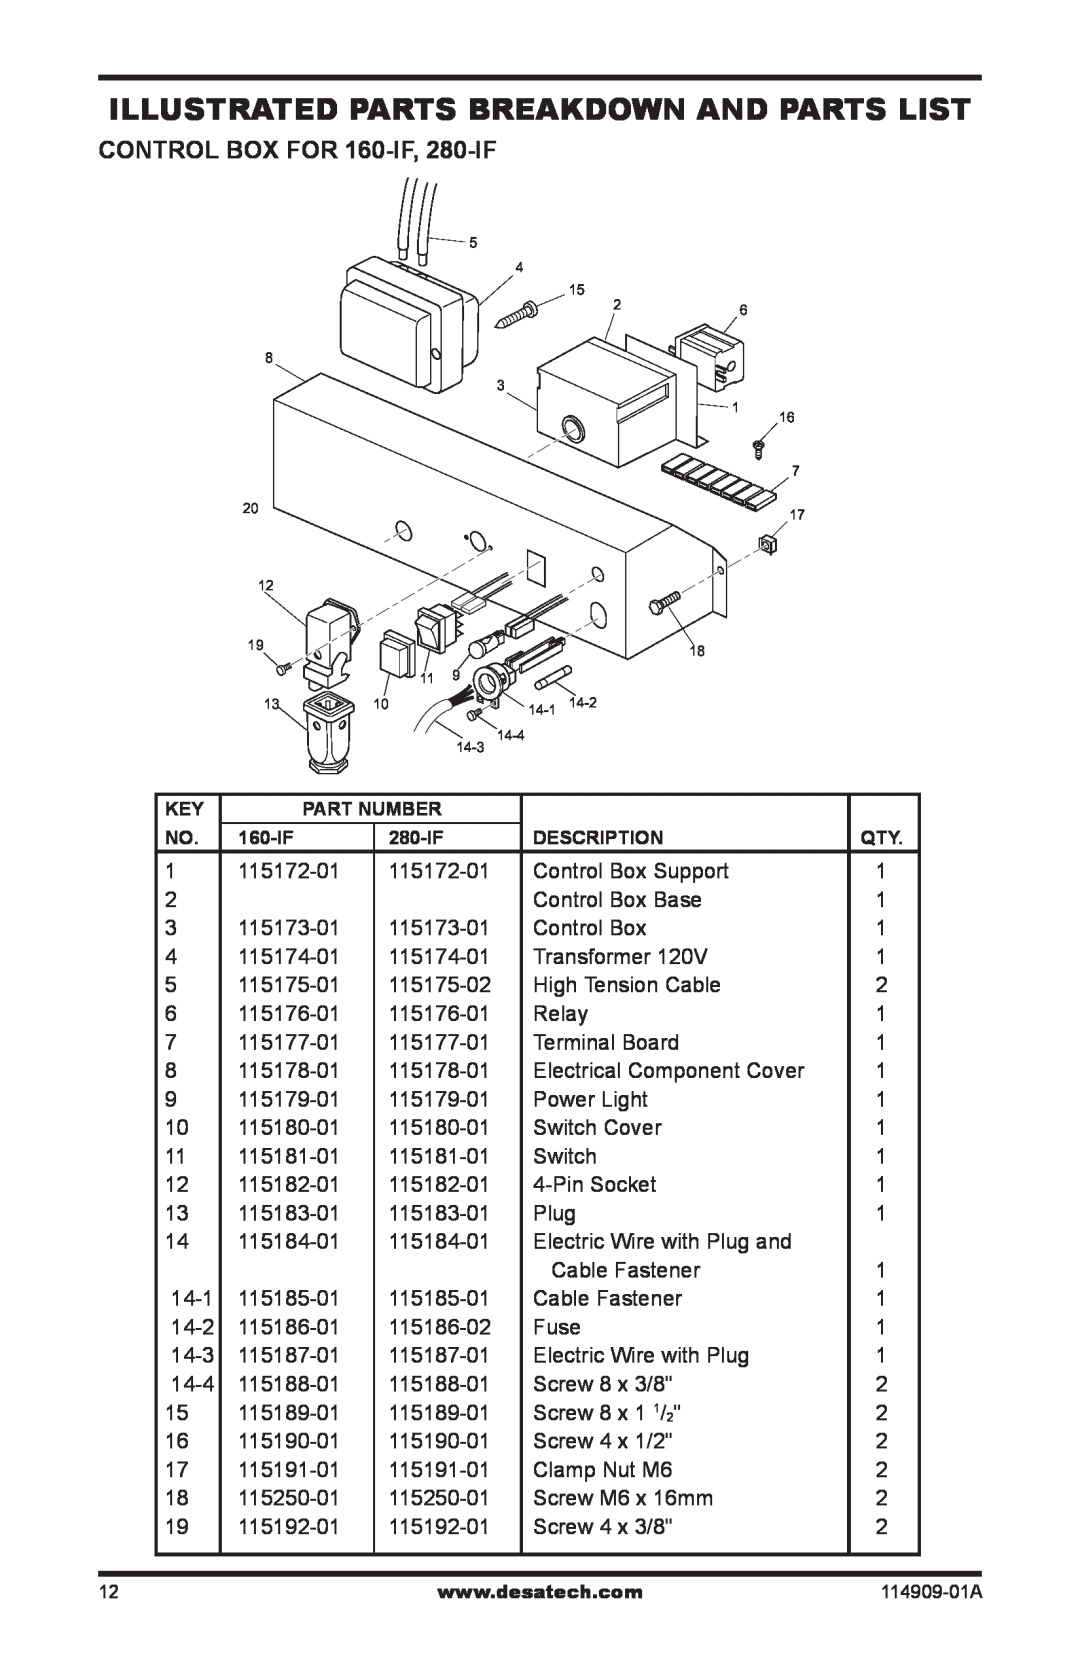 Desa owner manual Illustrated Parts Breakdown And Parts List, CONTROL BOX FOR 160-IF, 280-IF 